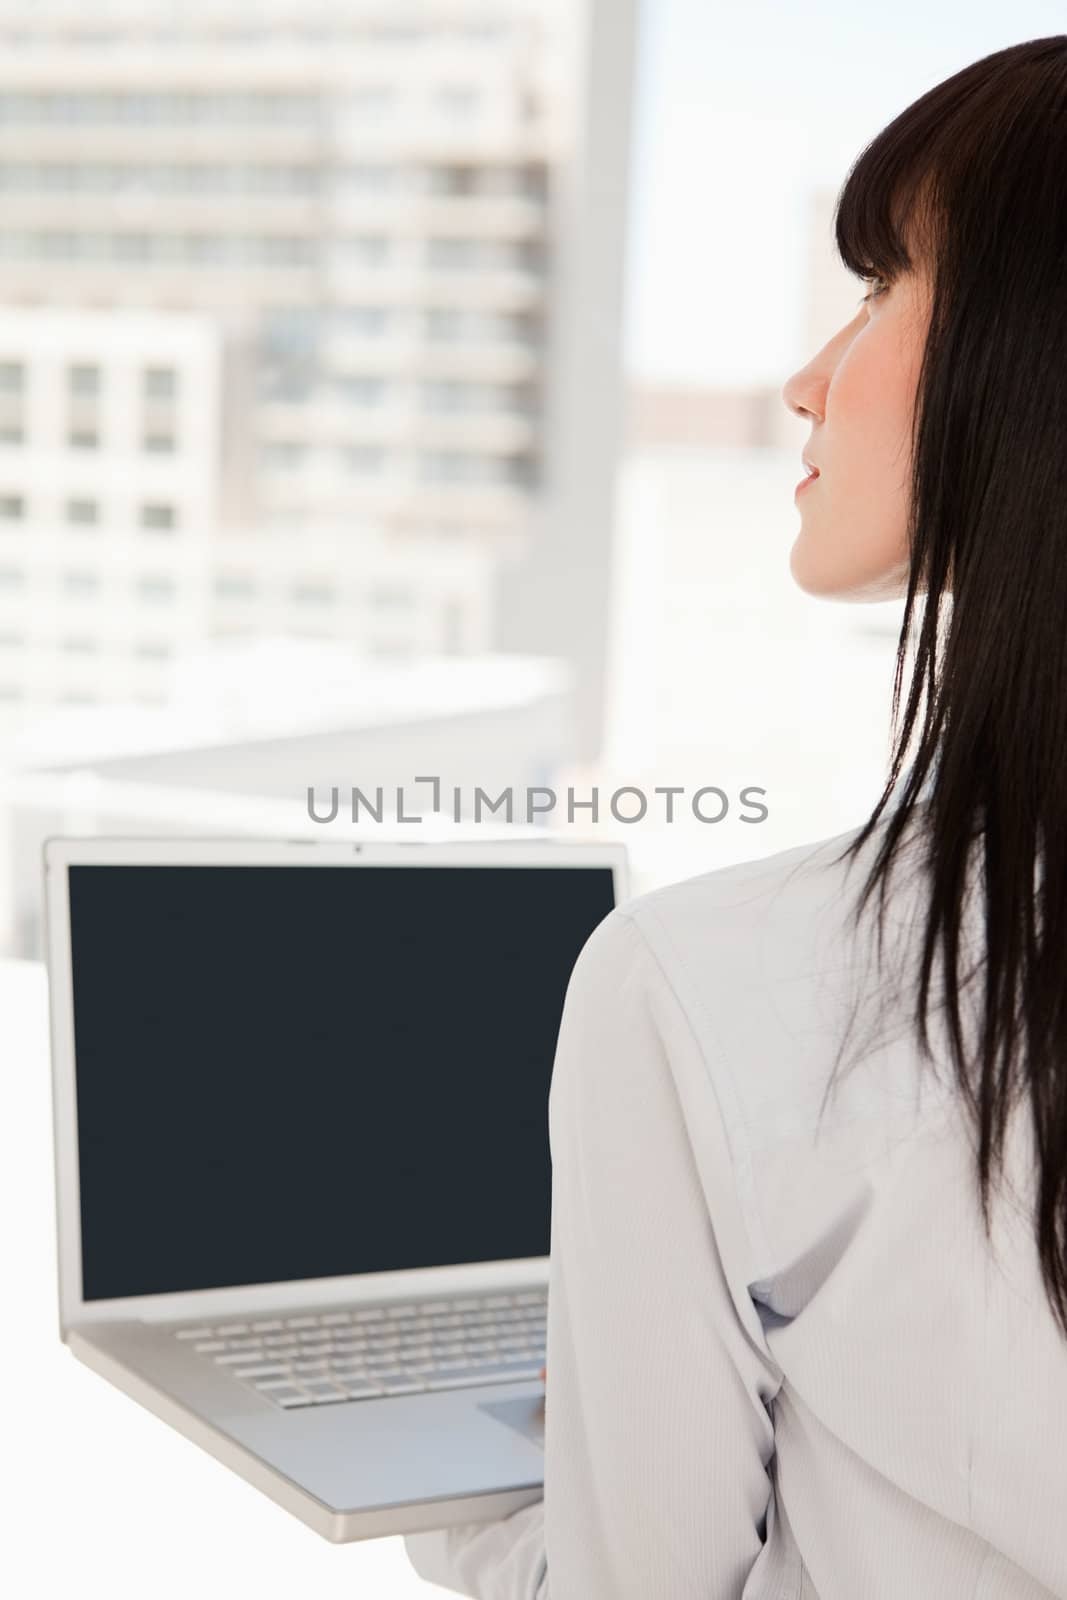 A woman looking upwards in her office with a laptop in her hand